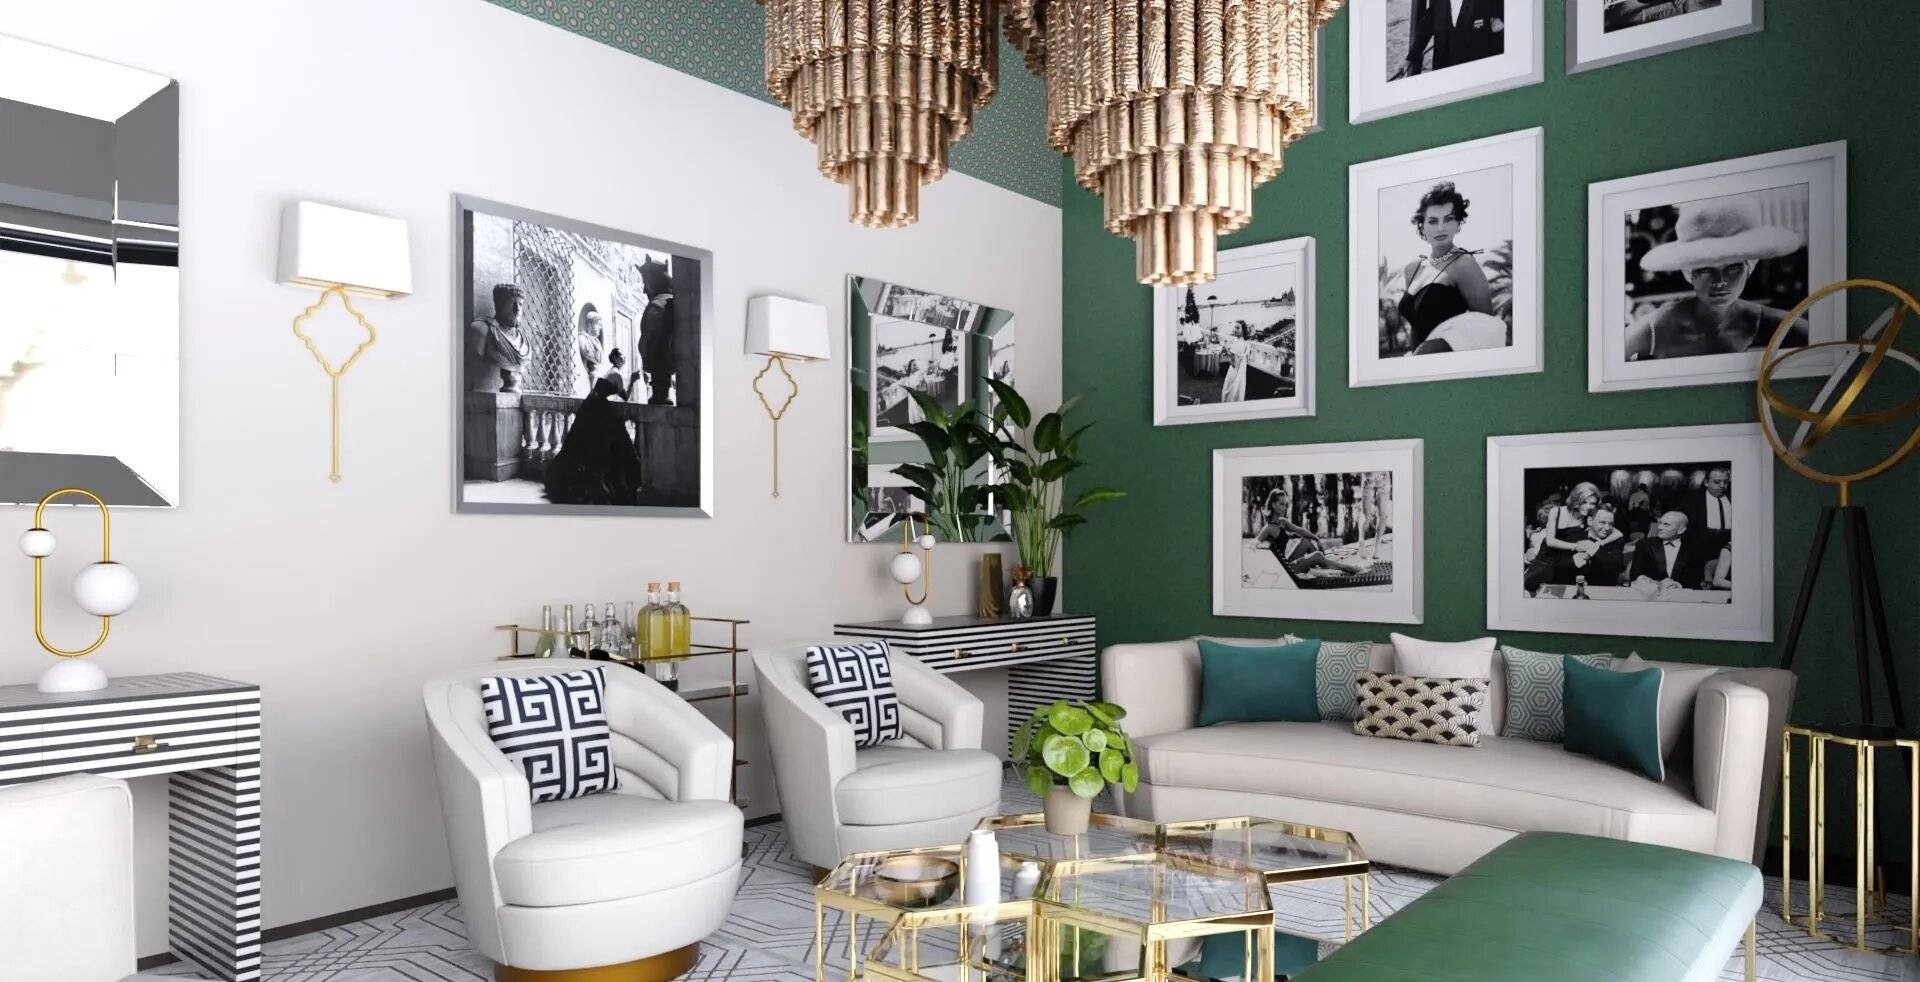 Hollywood Glam Interior Design Style Top 30 Popular Types of Interior Design Styles to Know - 25 Types of Interior Design Styles